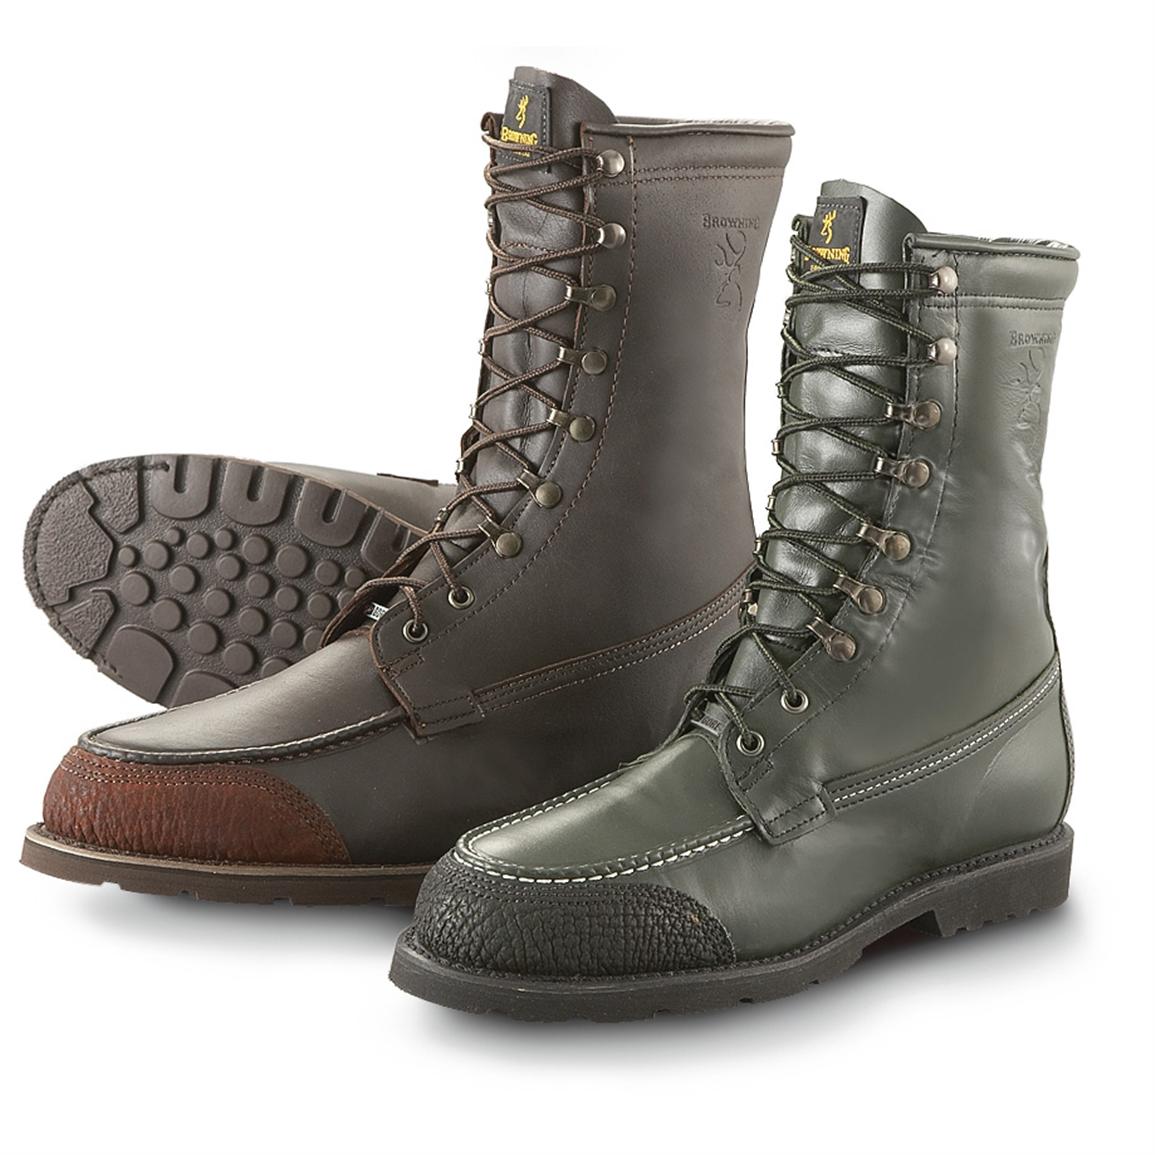 Browning Men's Featherweight Hunting Boots | vlr.eng.br